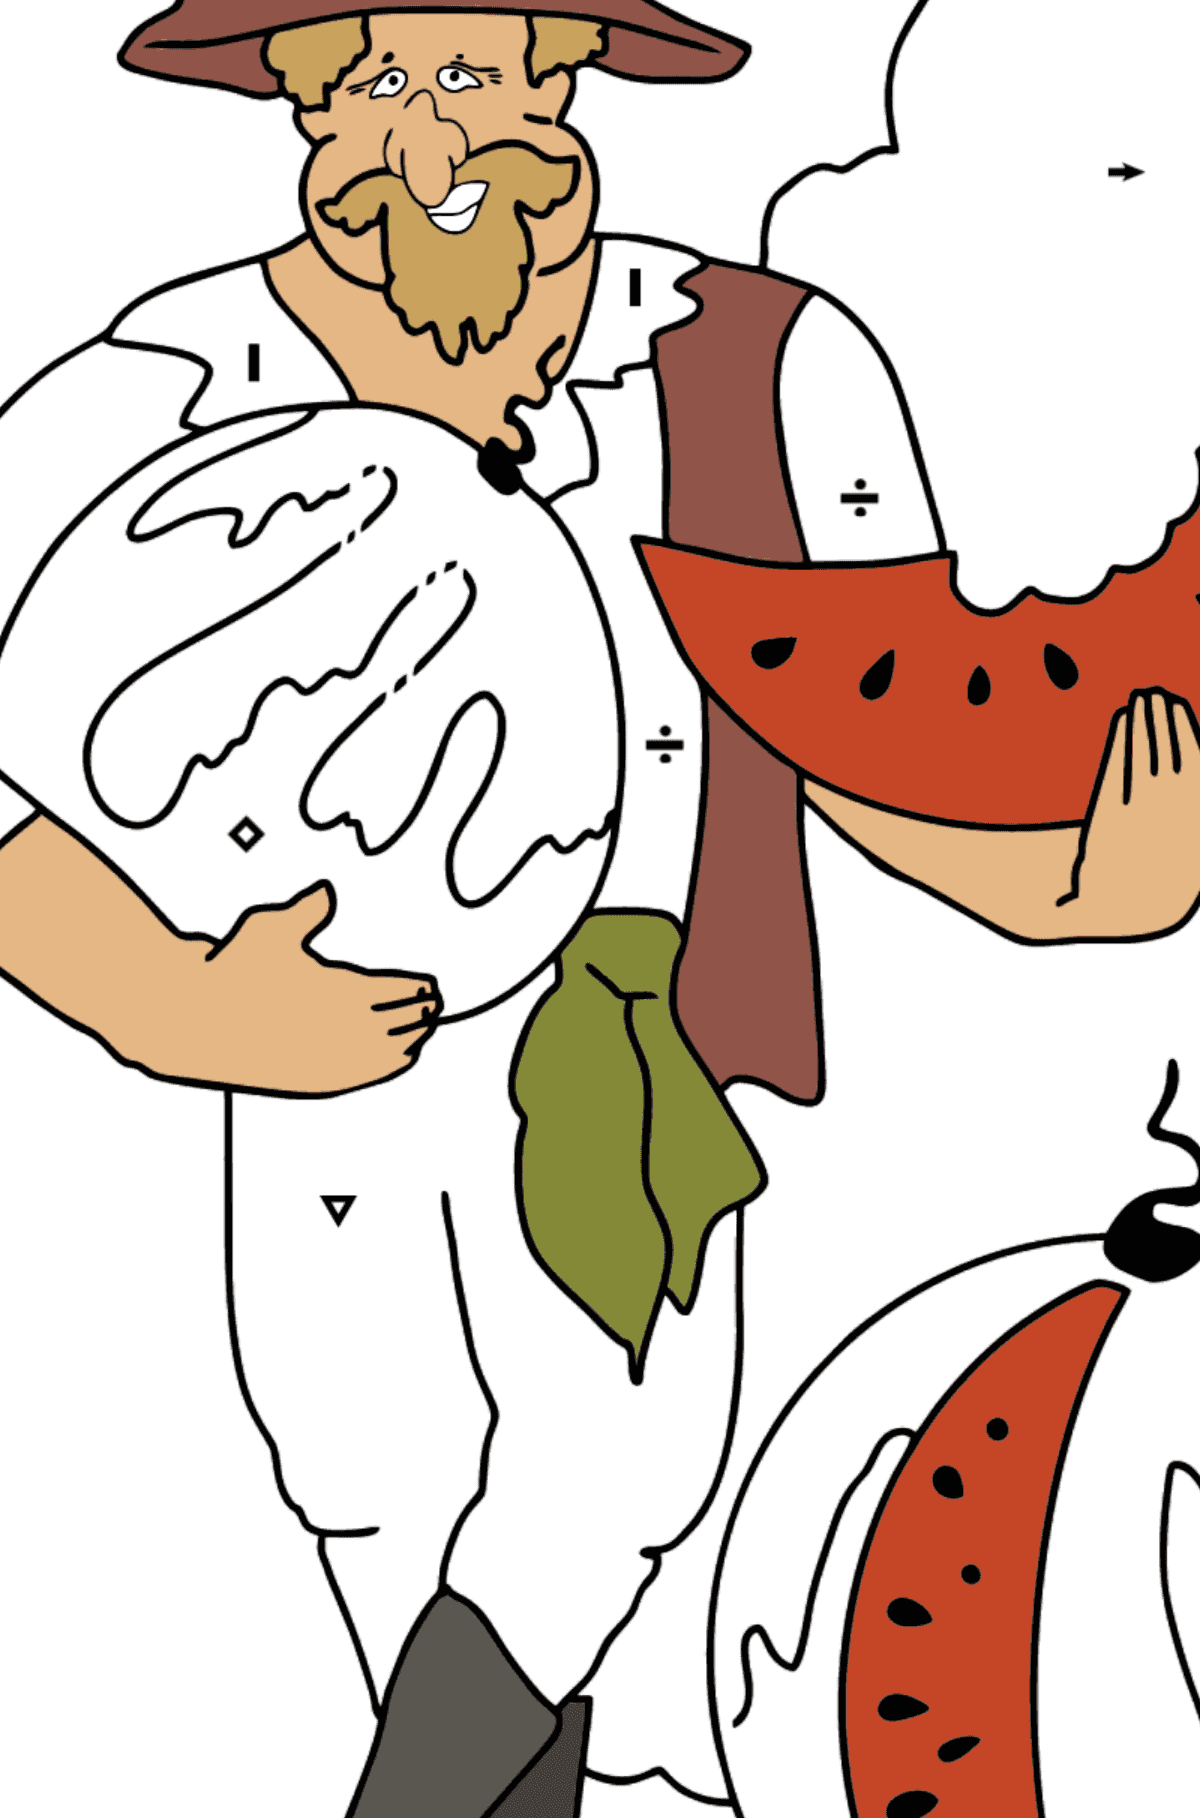 Coloring Page - A Pirate is Eating a Tasty Watermelon - Coloring by Symbols for Kids